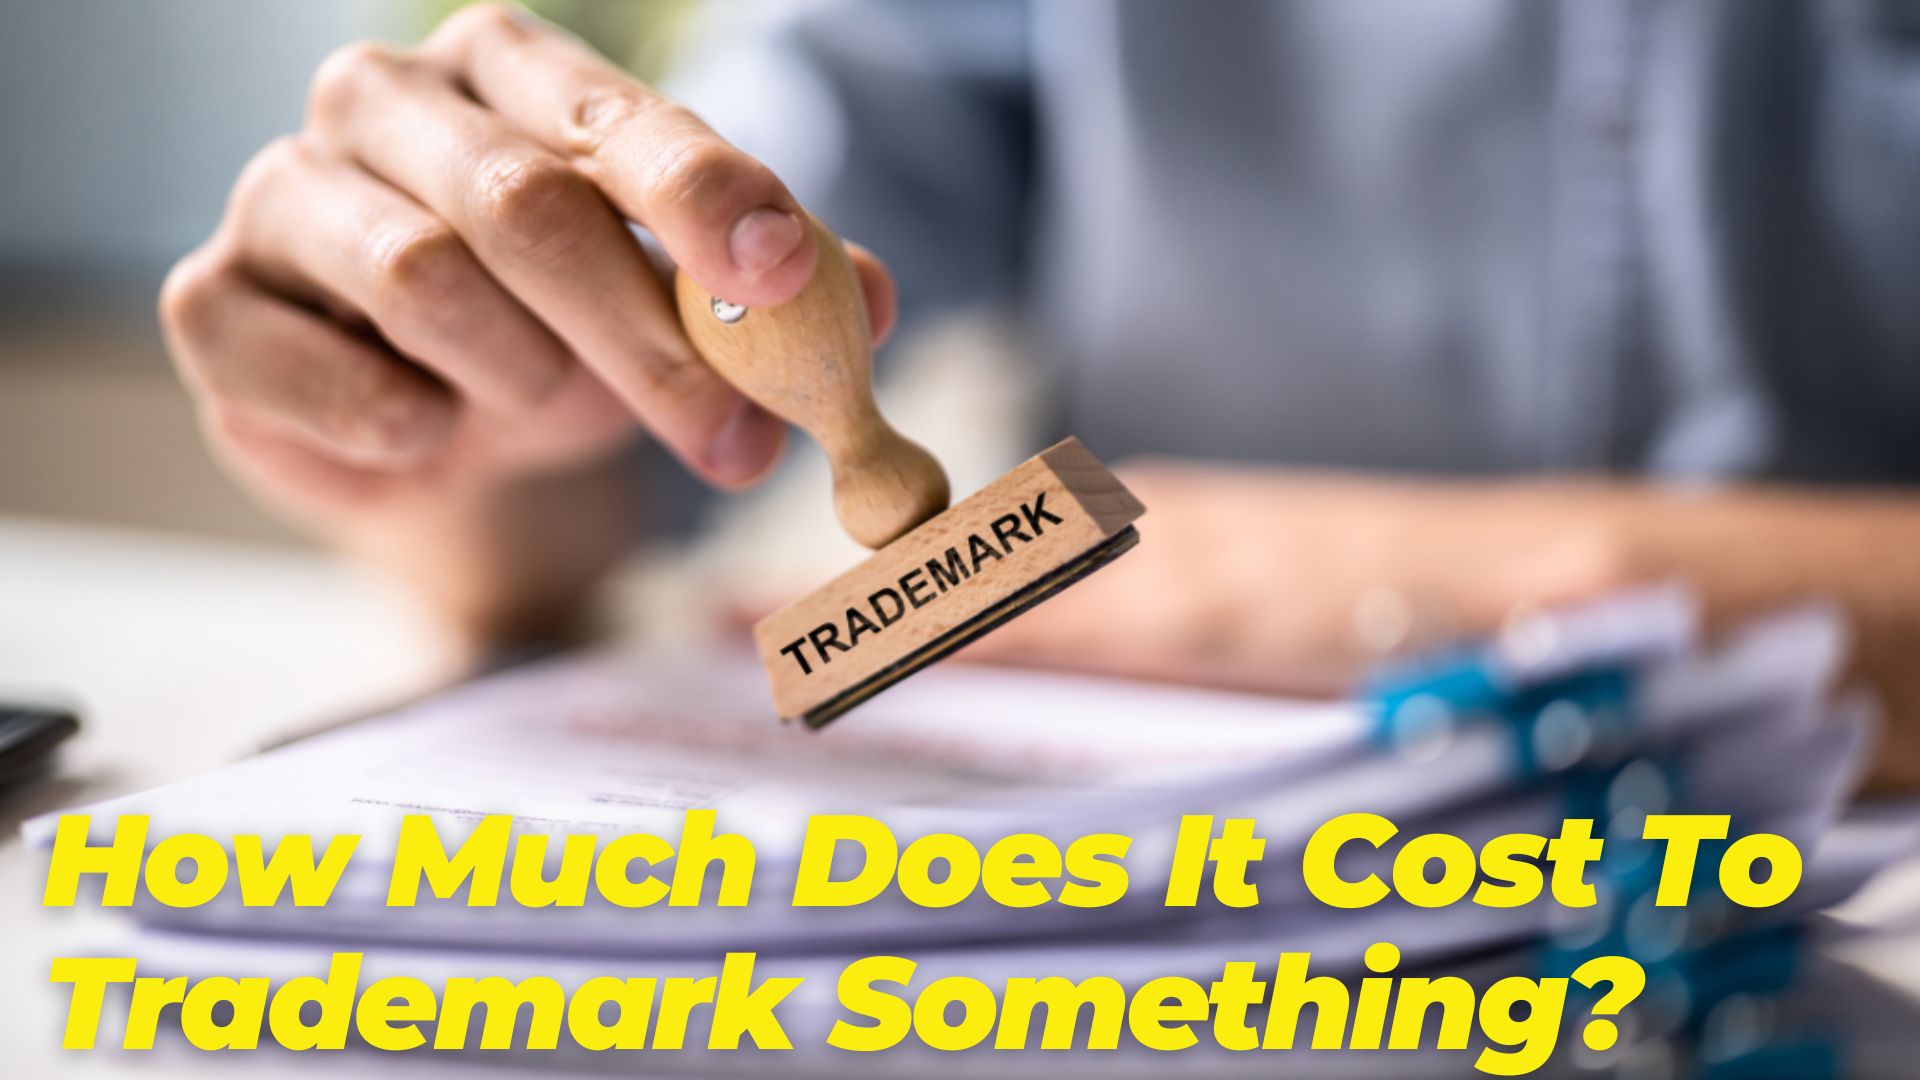 How Much Does It Cost To Trademark Something?